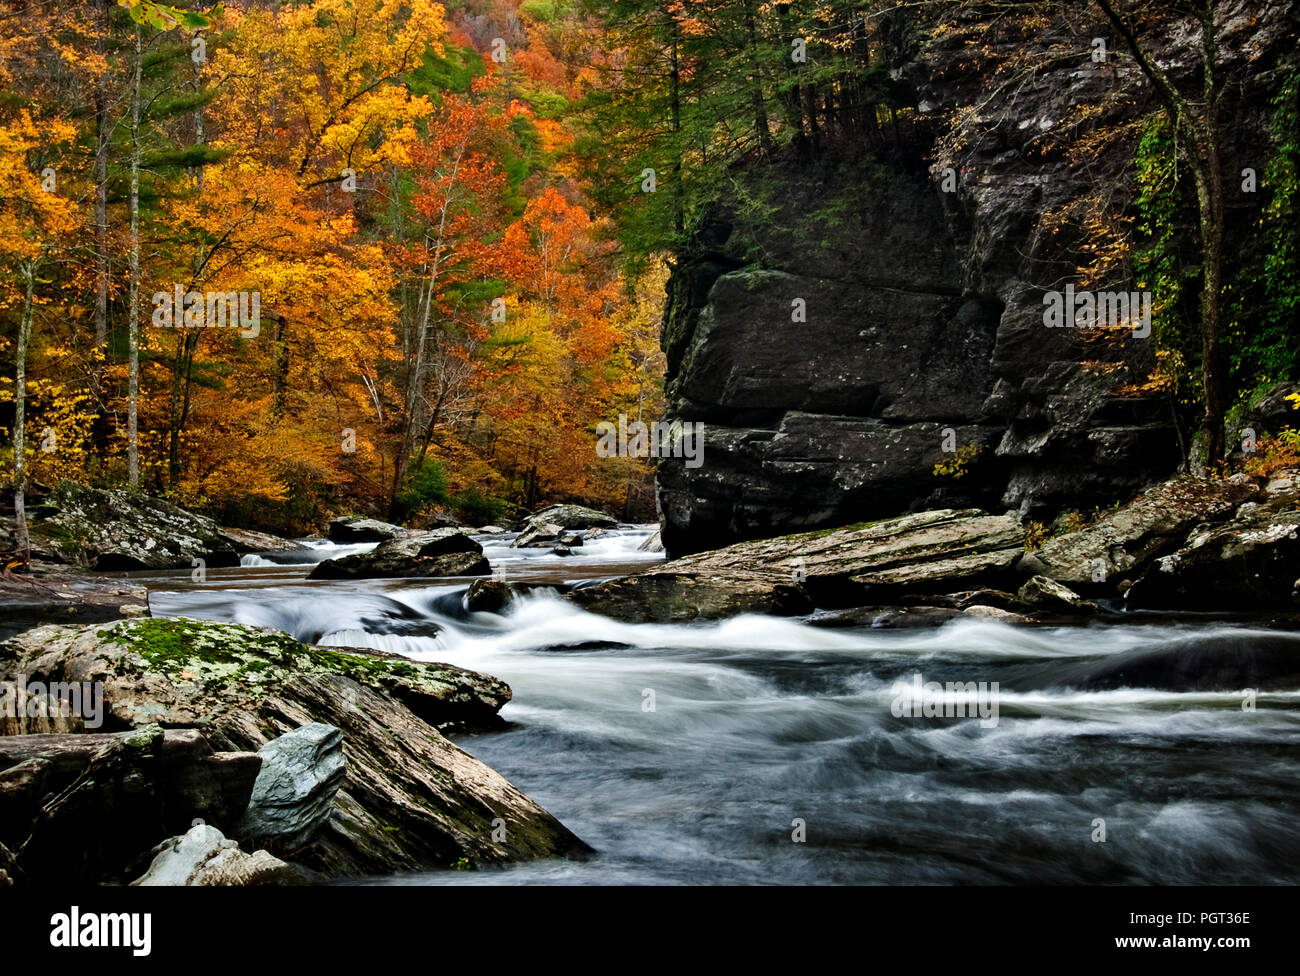 Tellico River autumn colors with slow shutter speed blurred water in the rapids. Stock Photo